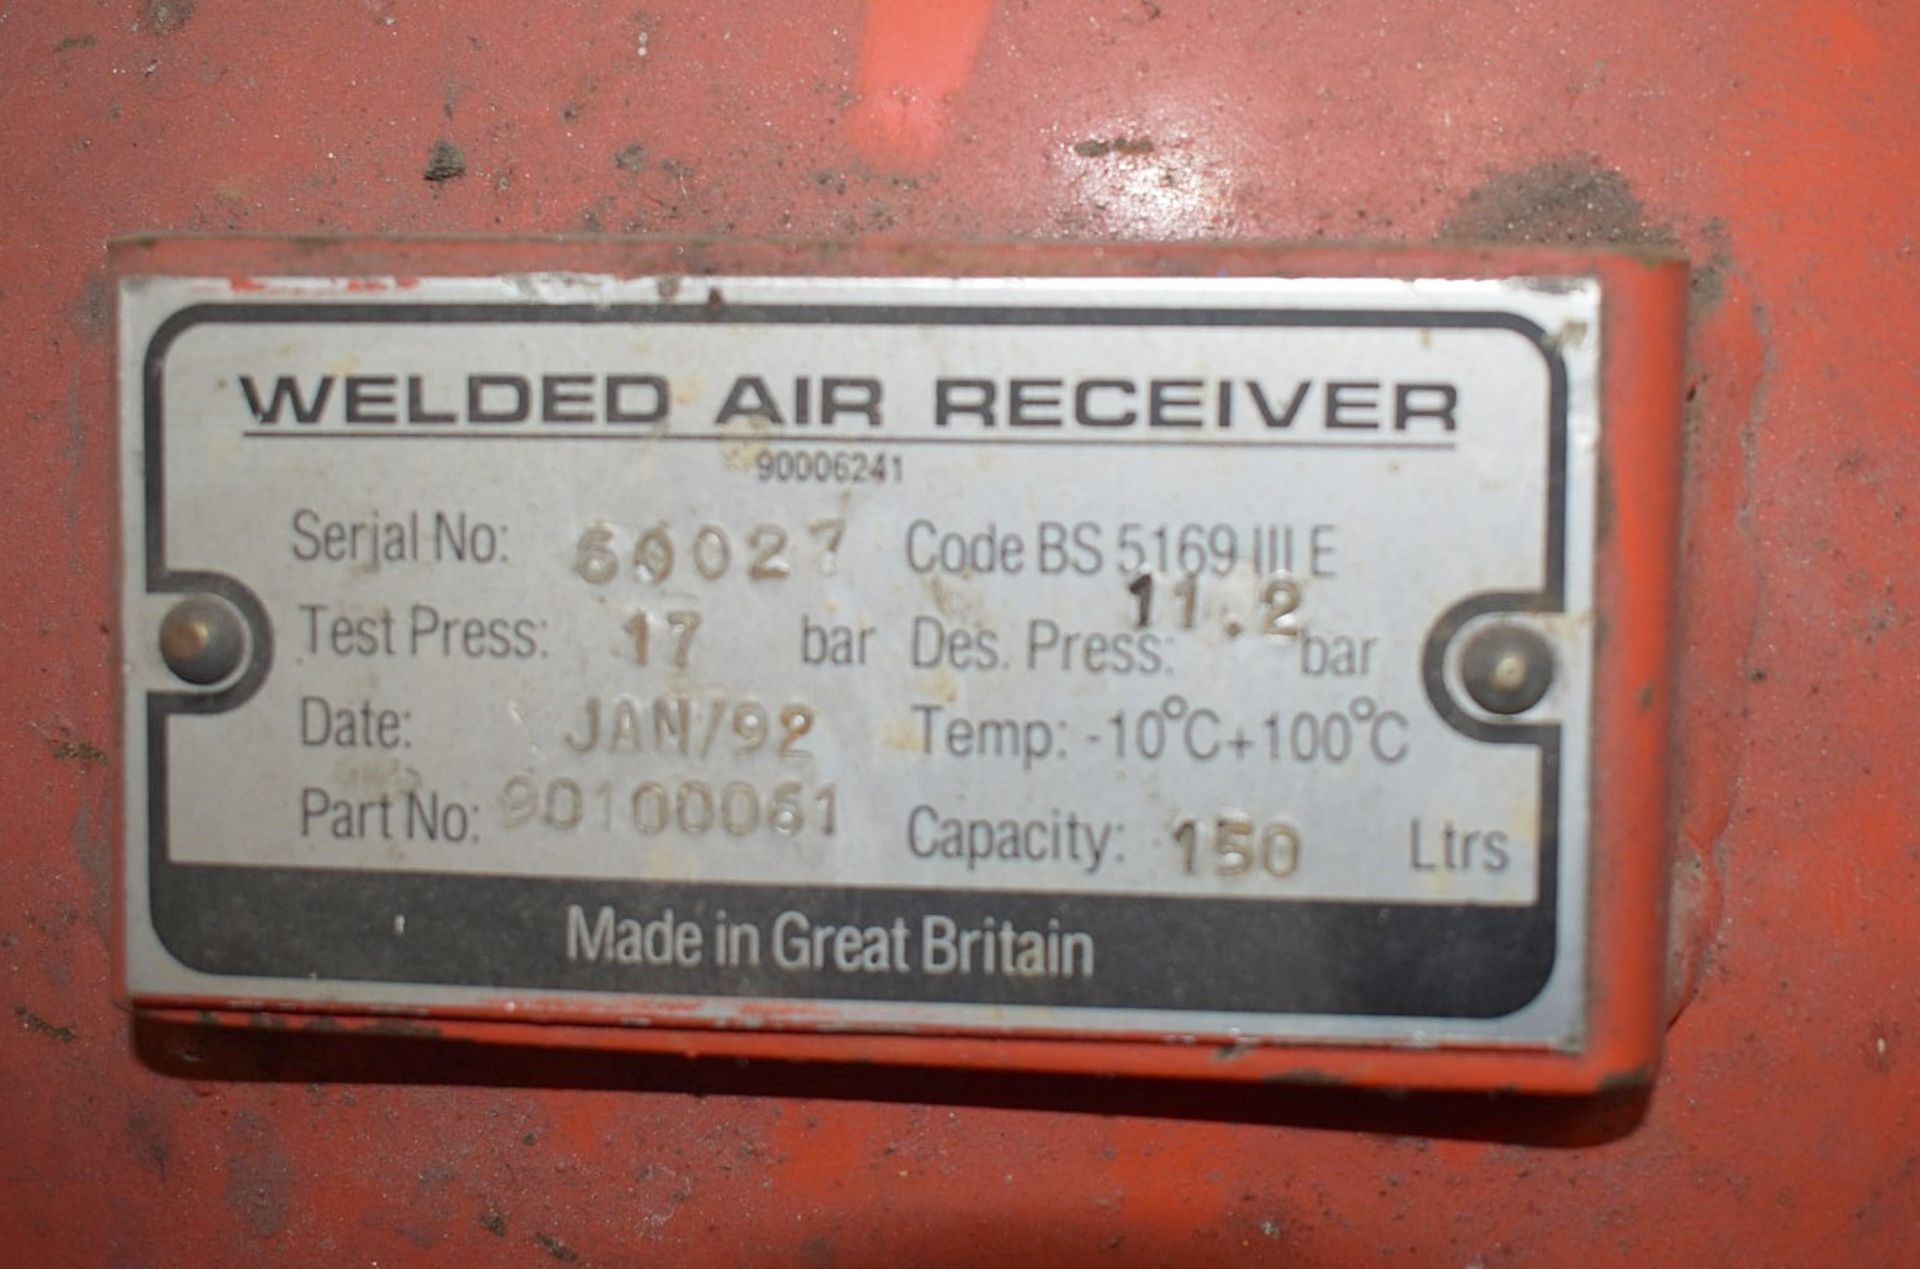 1 x RAND Welded Air Receiver - 150 Litre Capacity - Ref: DS7569 ALT - CL011 - Location: - Image 6 of 8